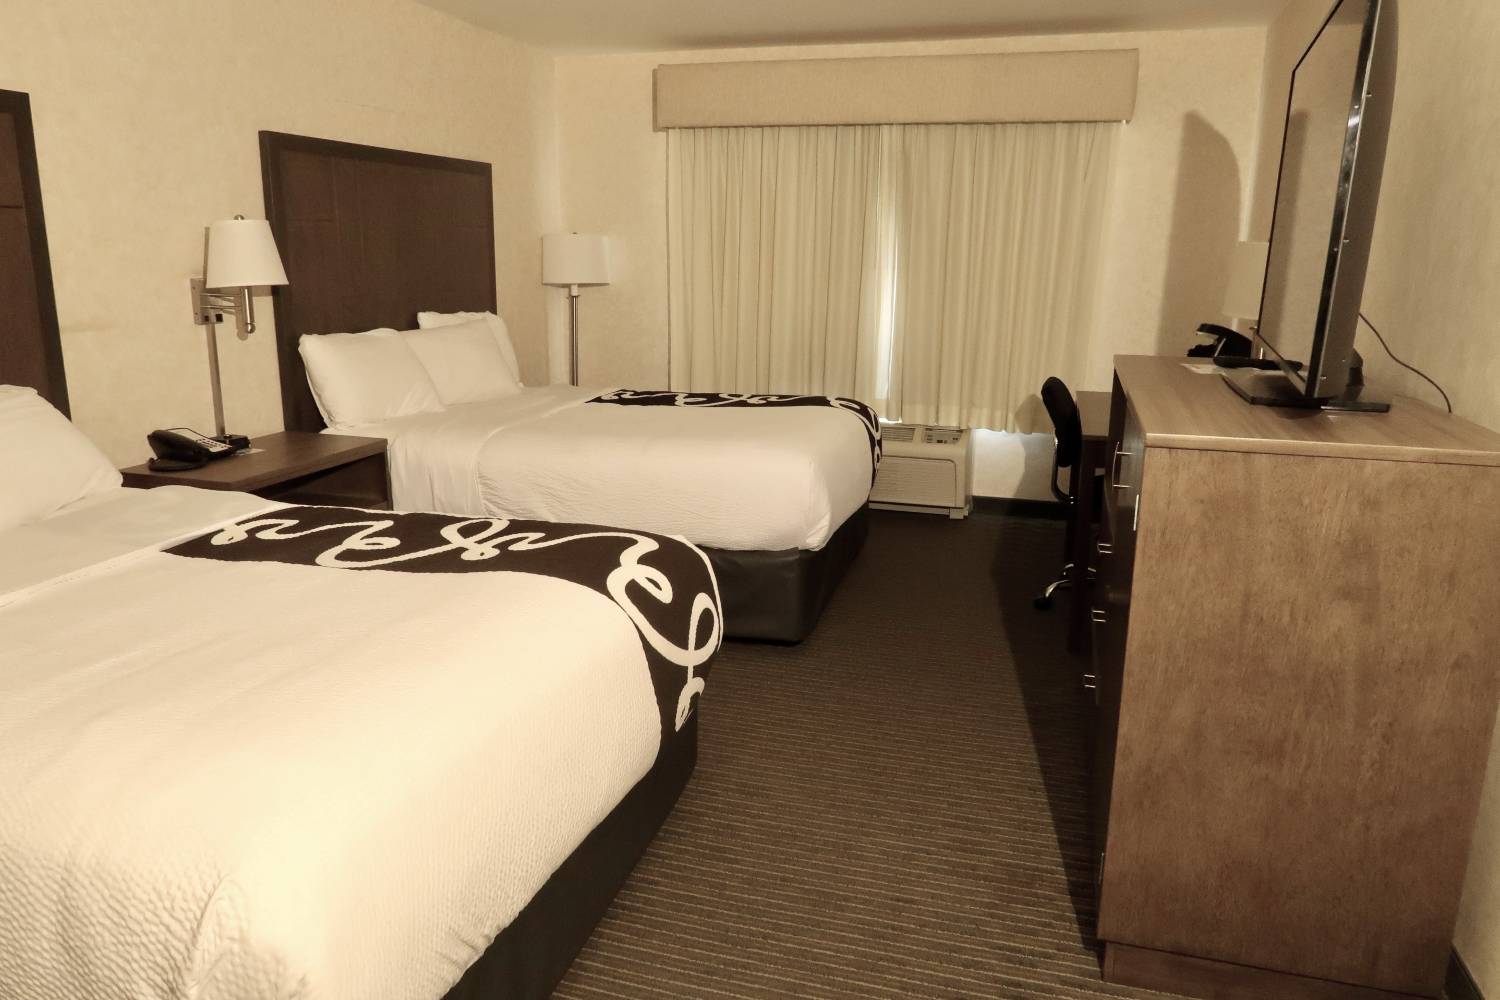 Deluxe double queen room at Inn at Gig Harbor